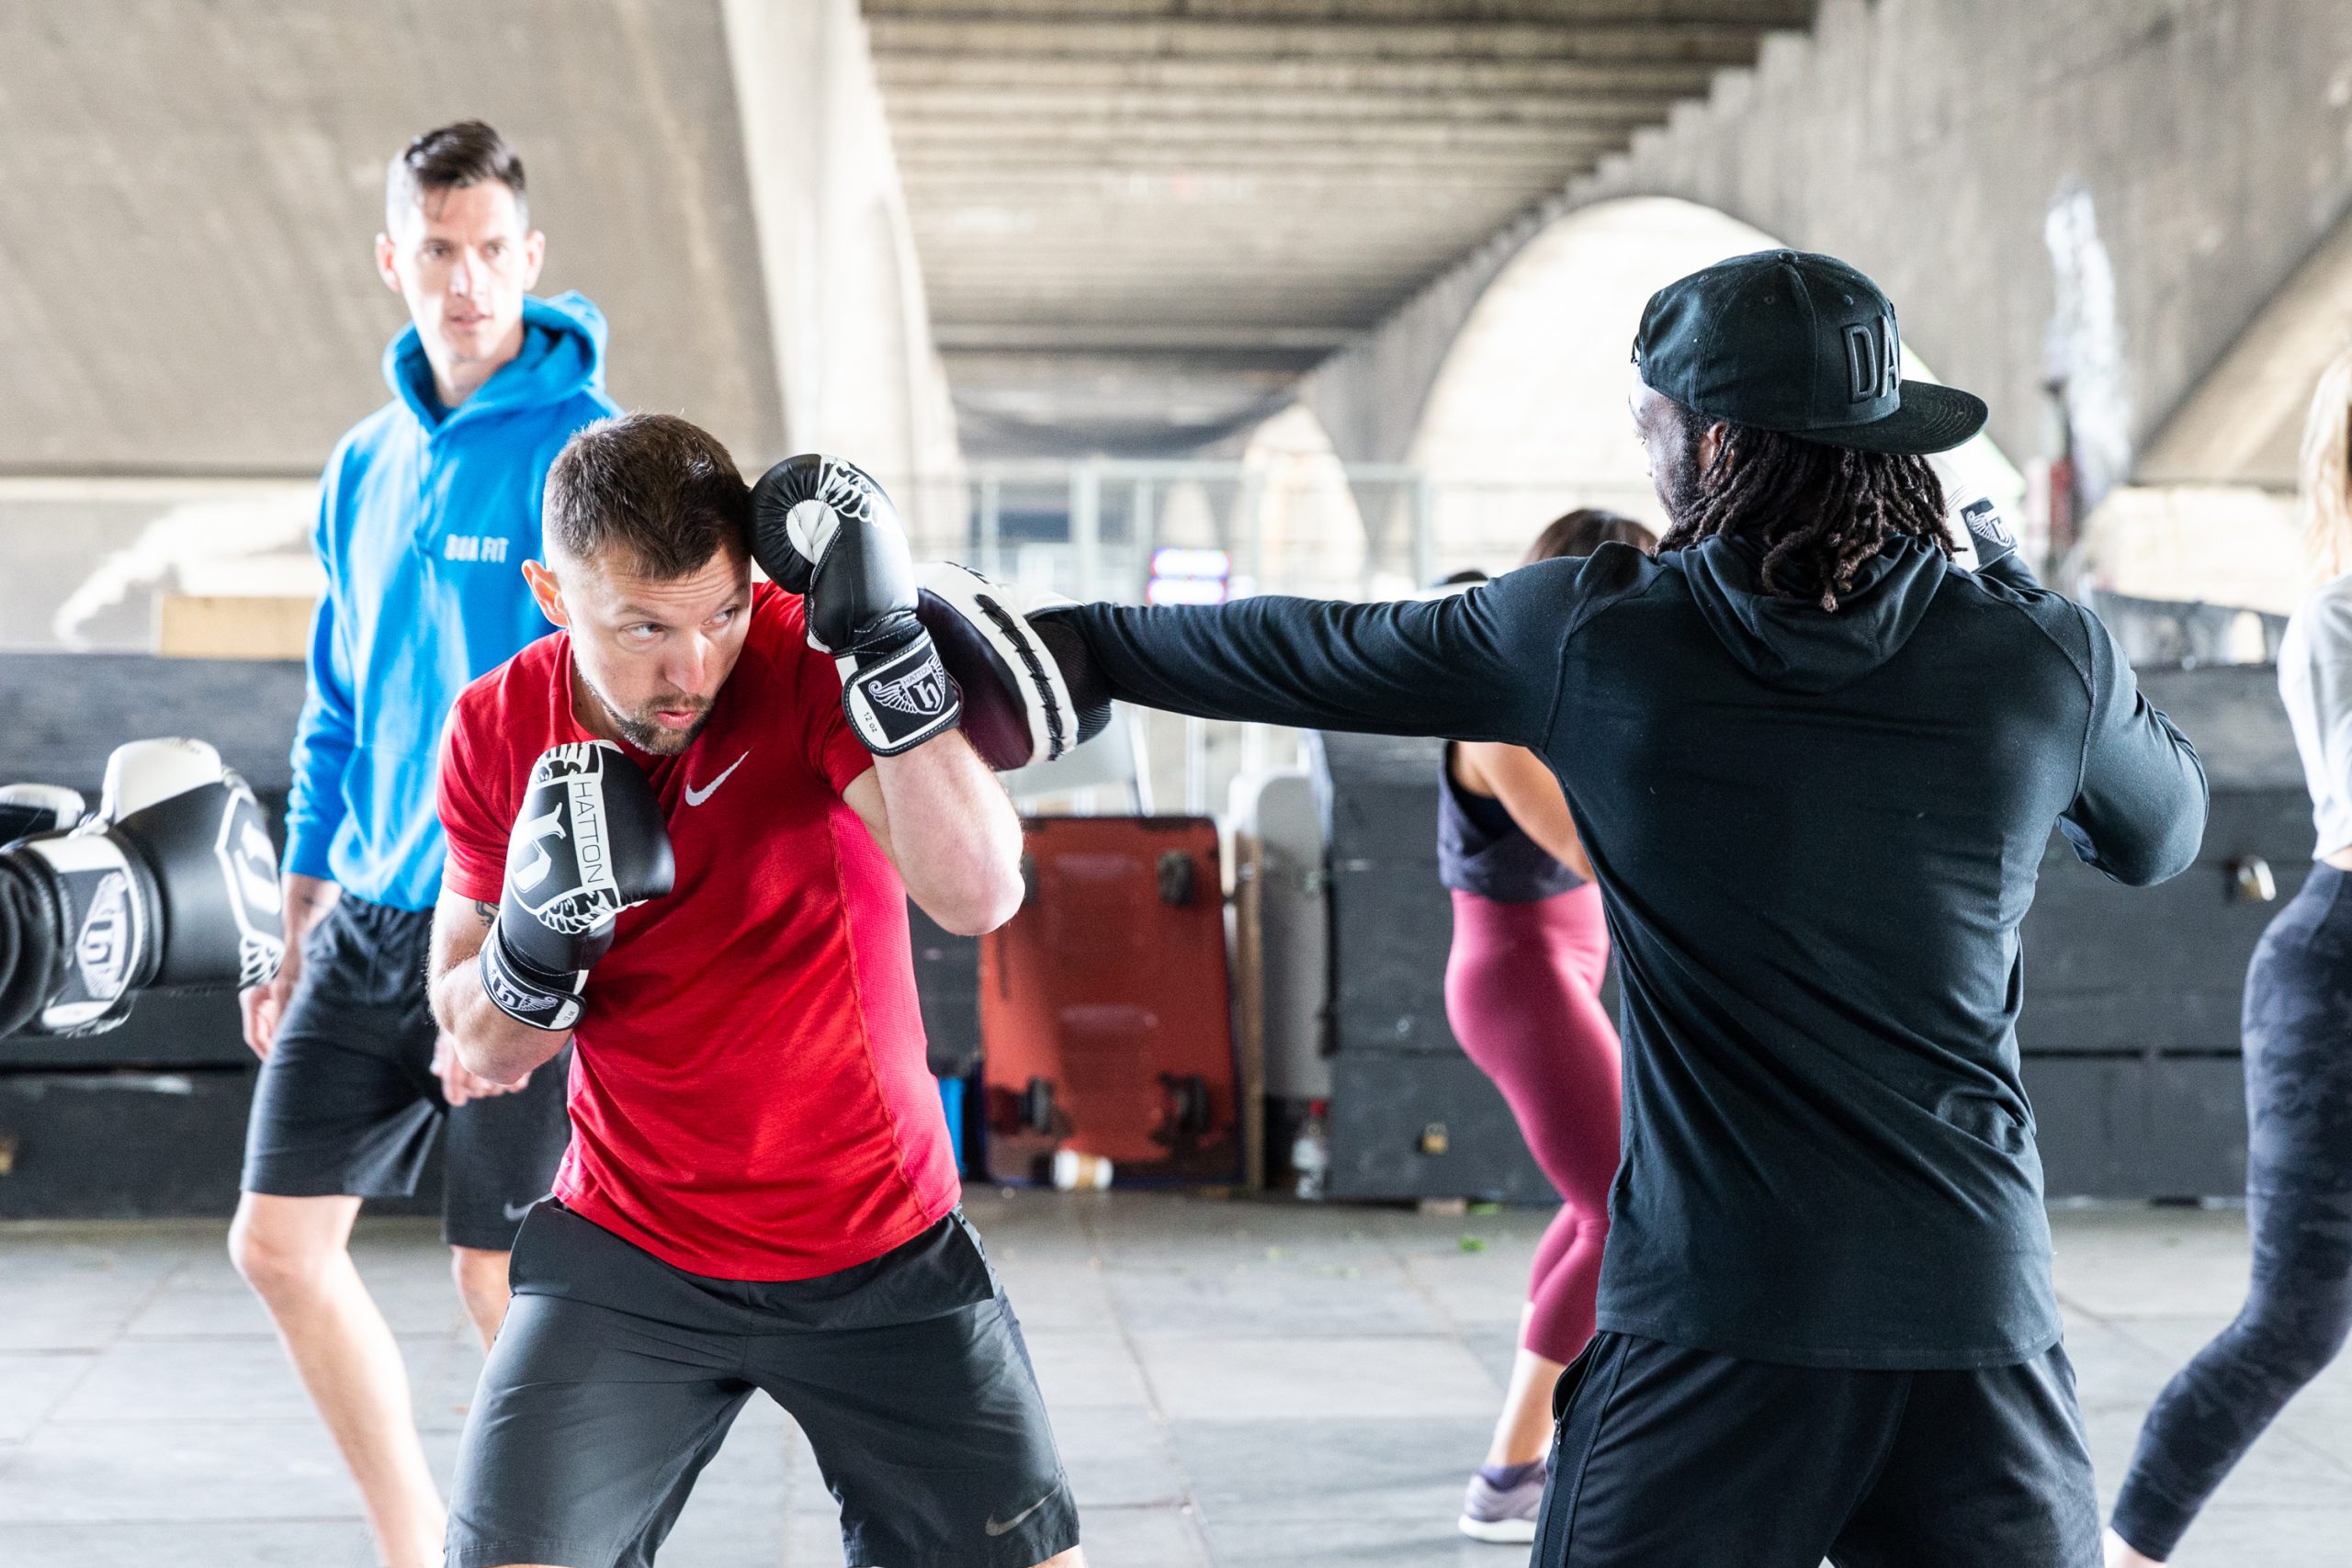 6 reasons why you should try a boxing class in 2022